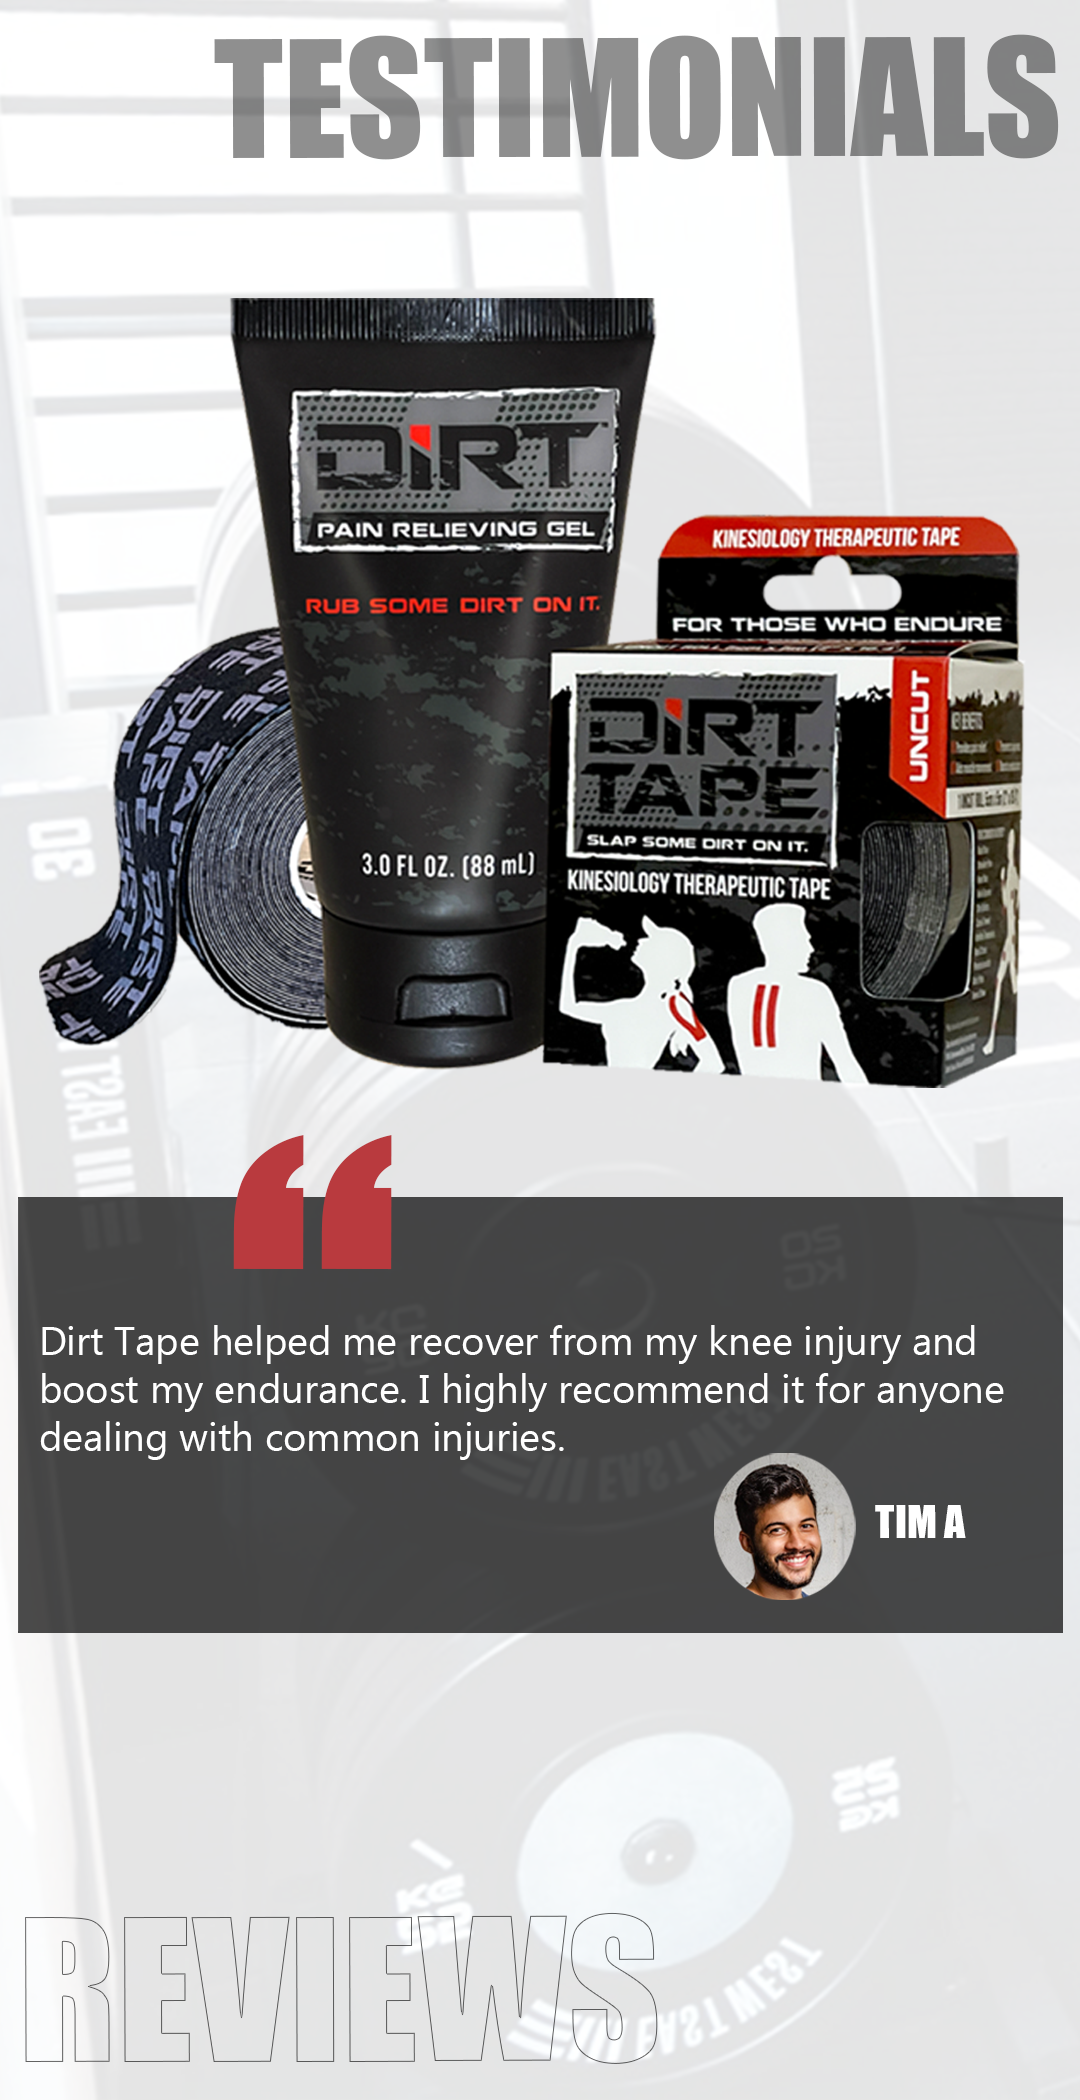 Dirt Gel, Rub Some Dirt on It, Pain relieving gel, Dirt Tape, Slap some Dirt on it, Kinesiology tape, KT Tape